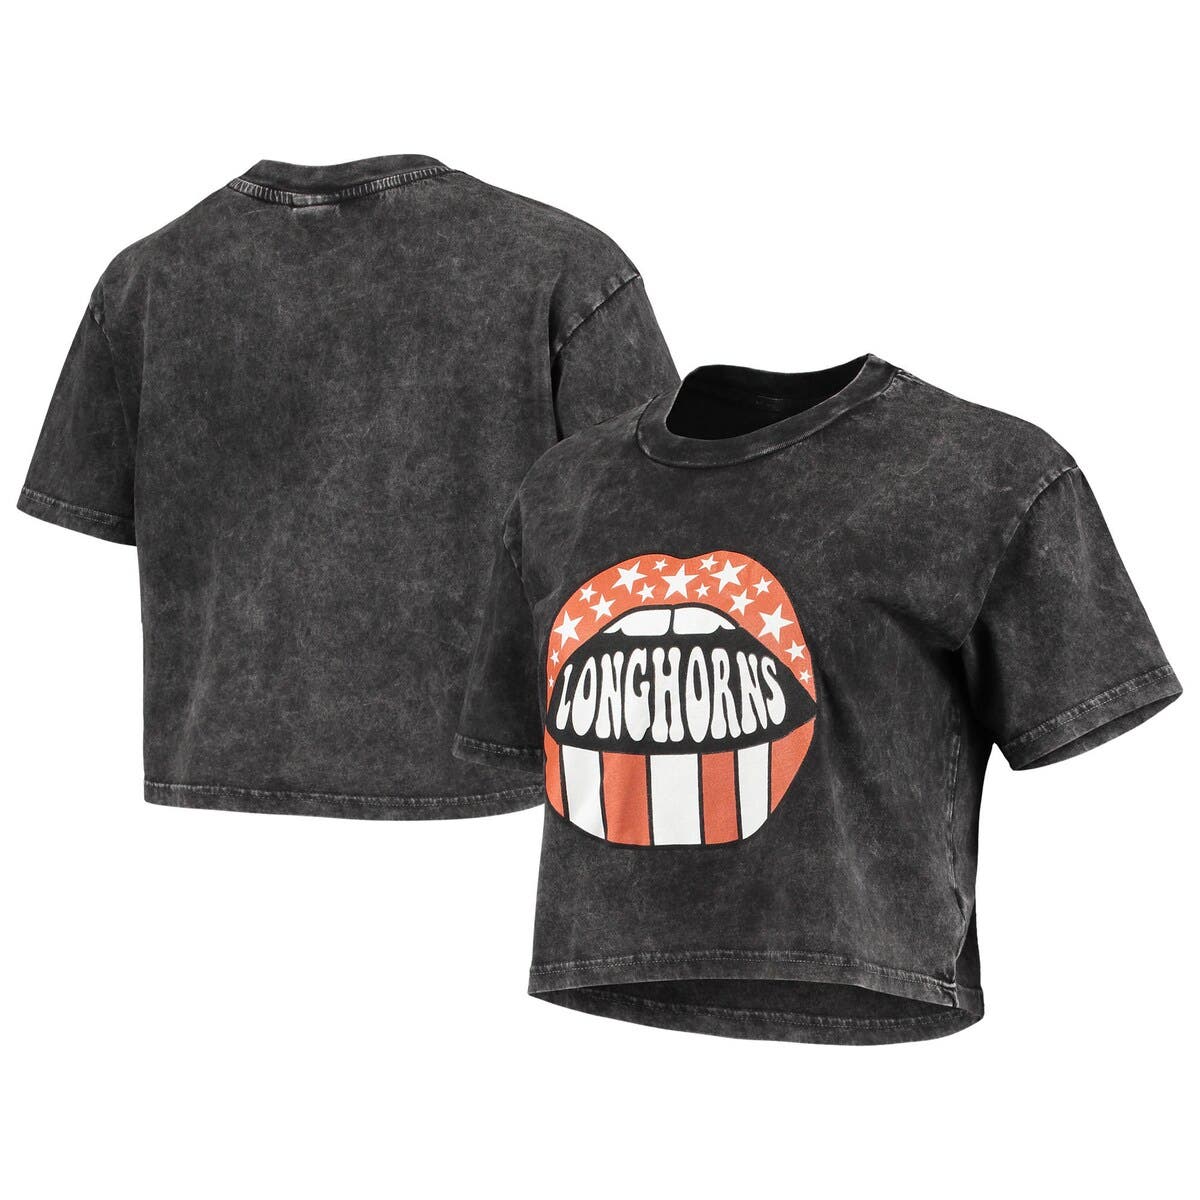 CHICKA-D Women's chicka-d Graphite Texas Longhorns Mineral Wash Lips Short 'n Sweet T-Shirt at Nordstrom